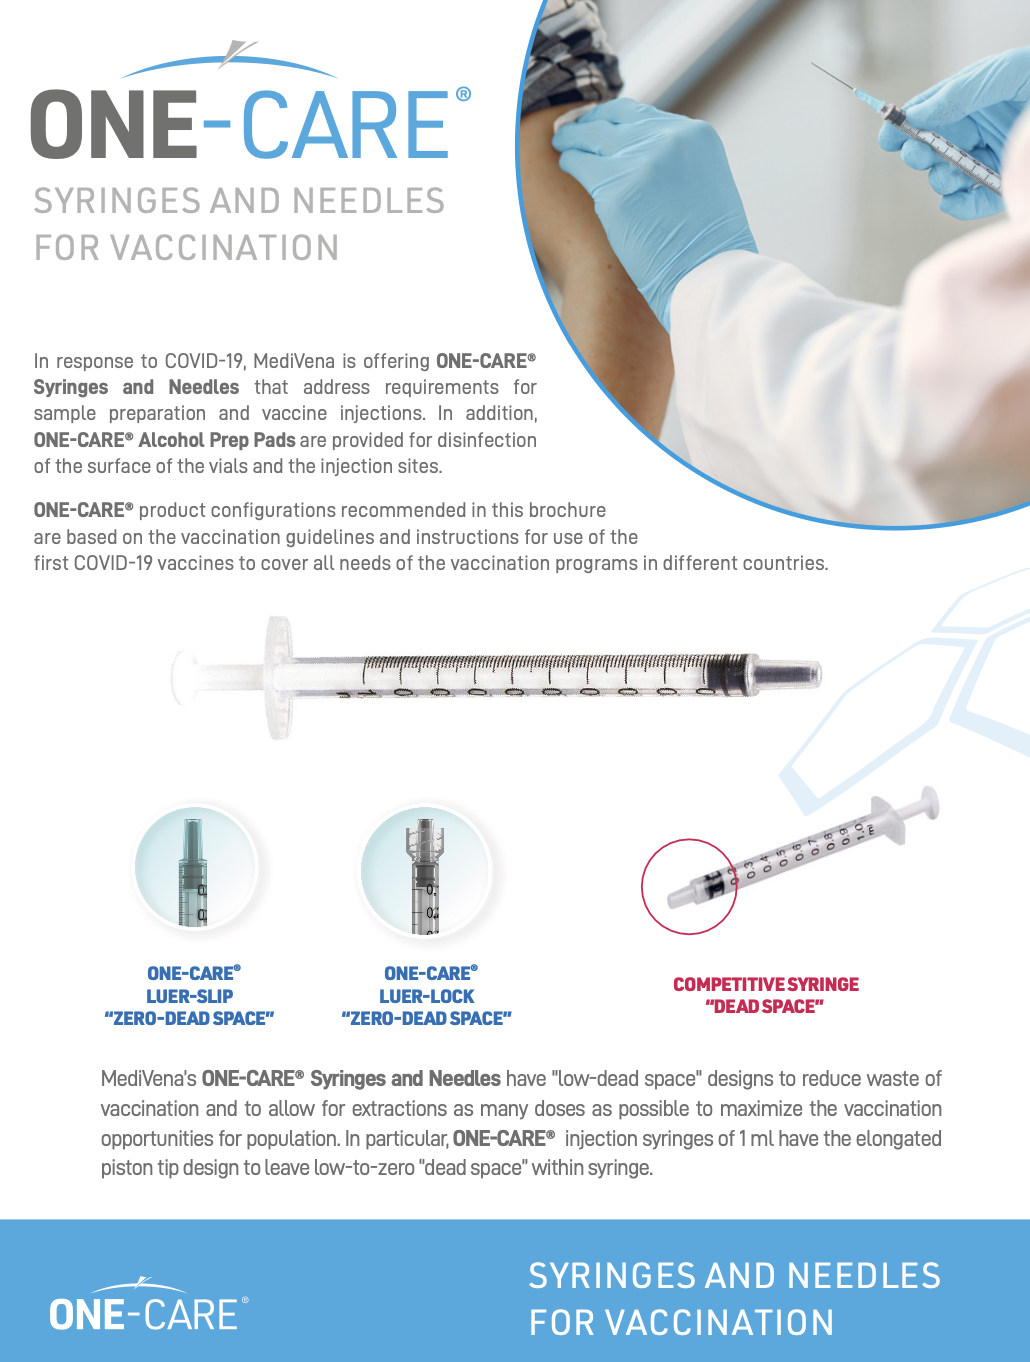 Syringes and needles for vaccination